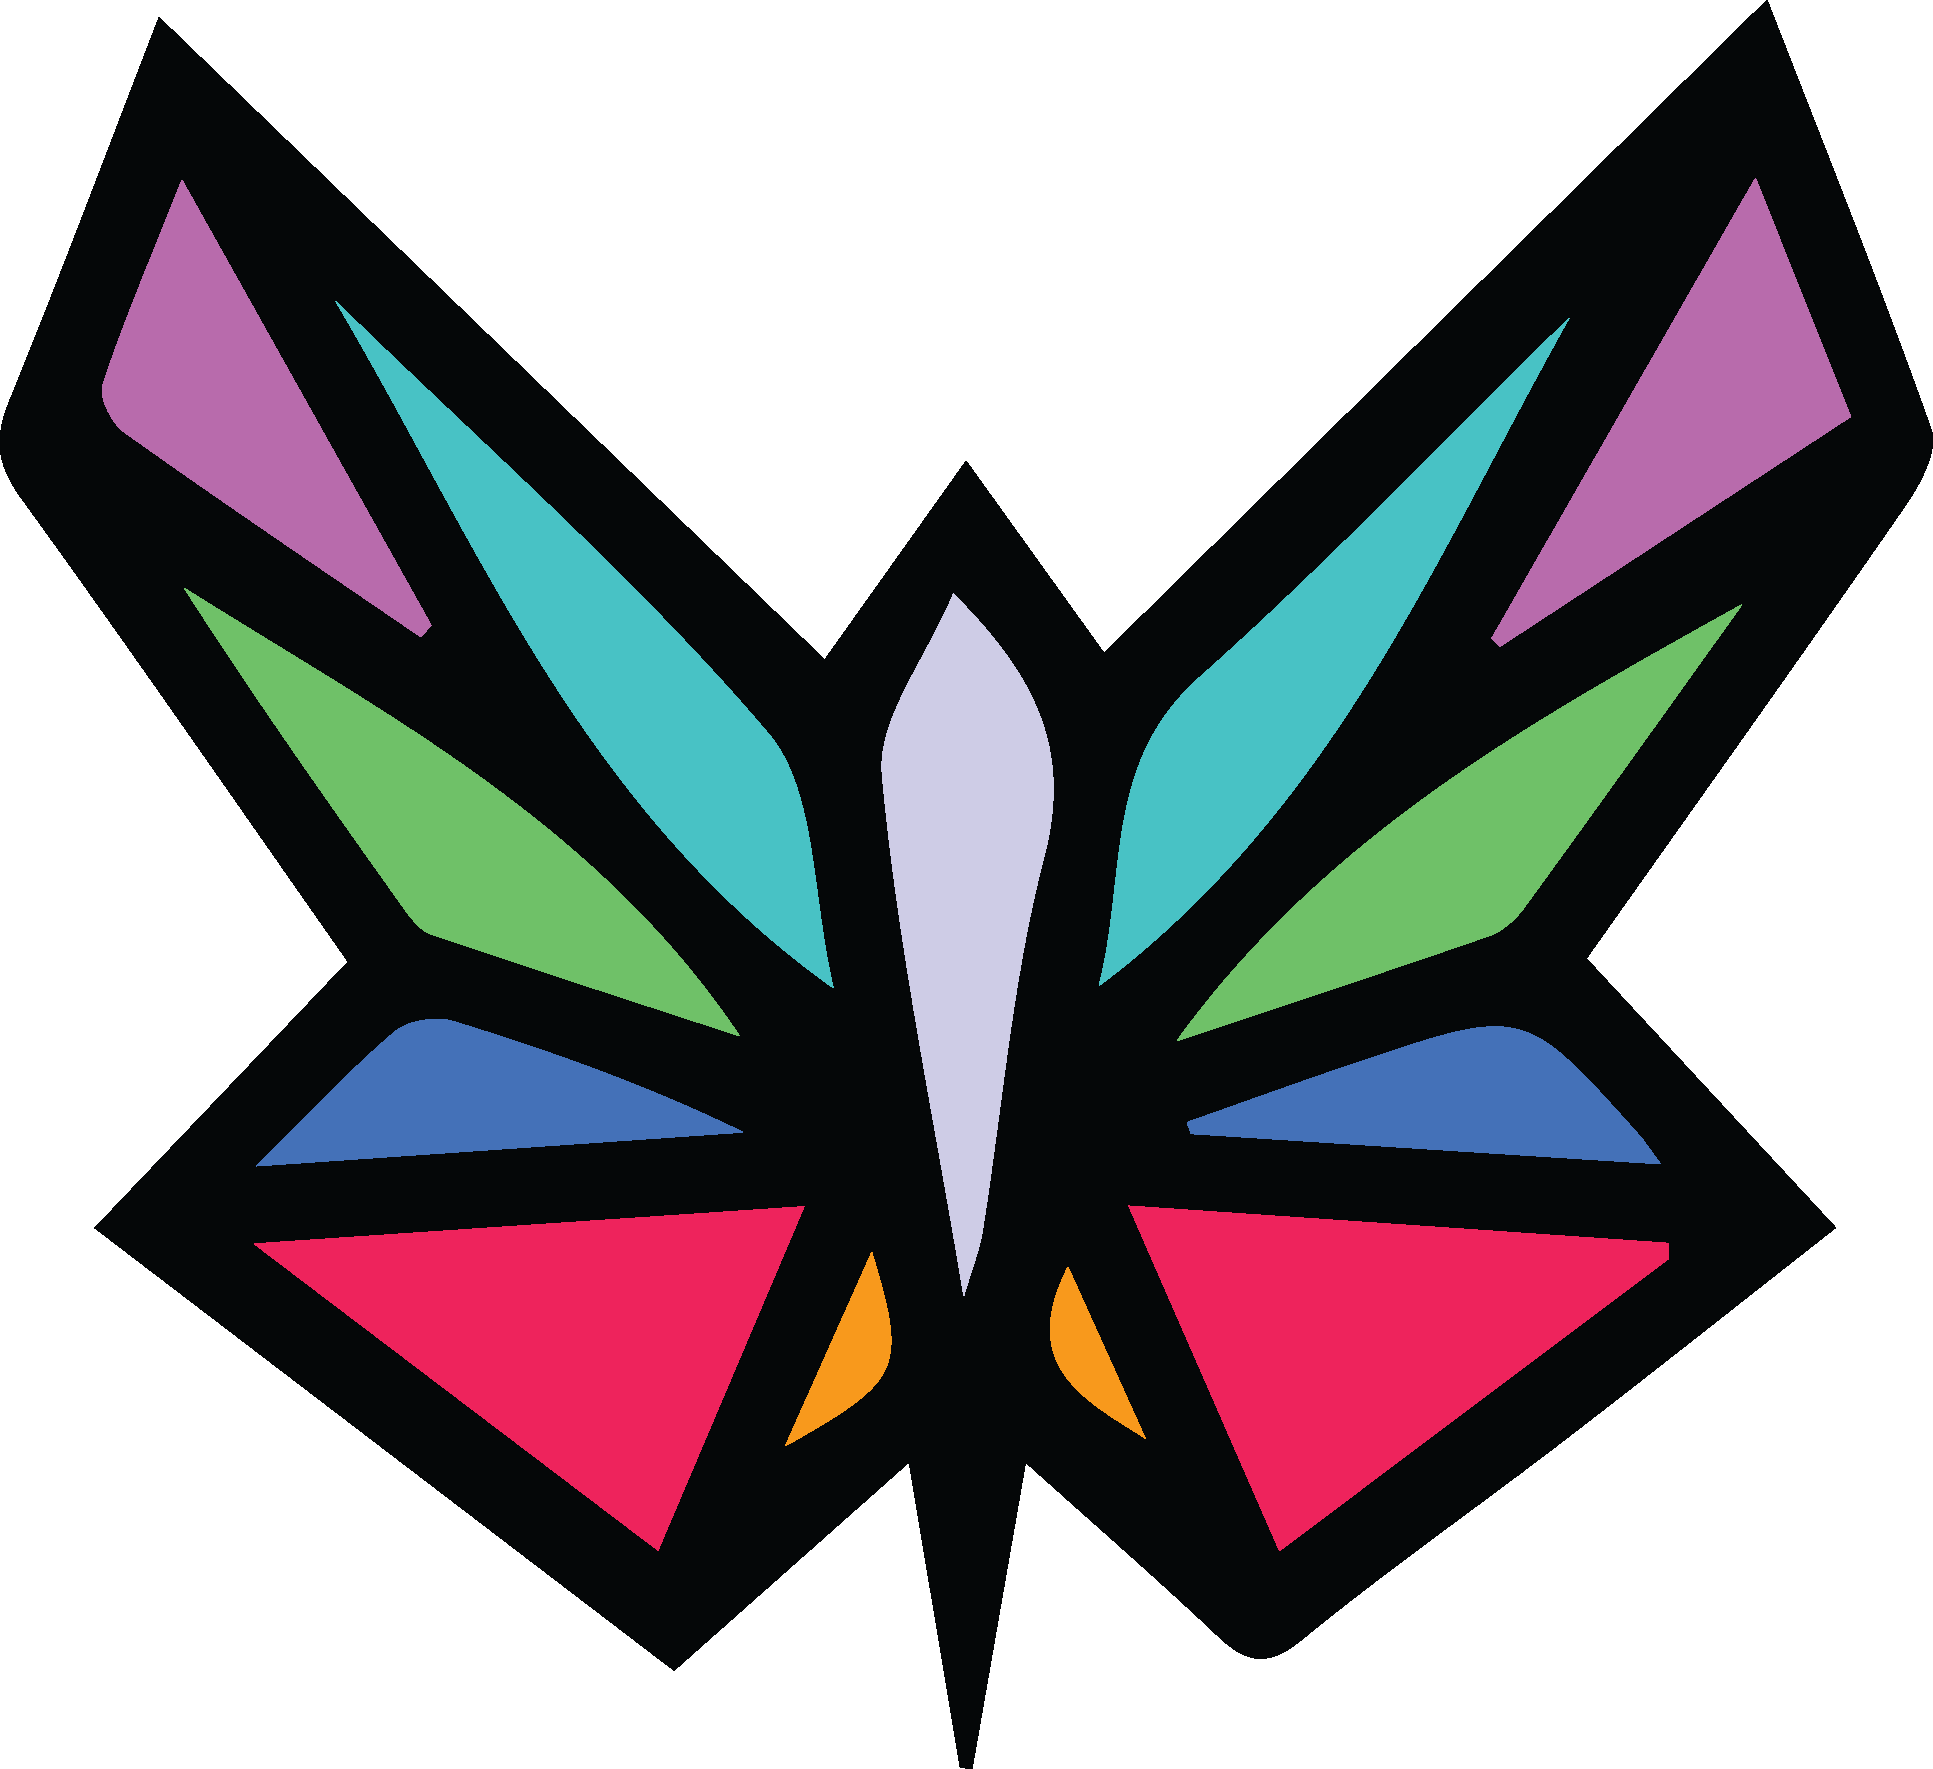 The logo of standout glass in Dallas, Texas, a dallas stained glass and repair company / service. The images has a transparent background. There's a butterfly looking stained glass window with a black frame. The panes are very colorful.